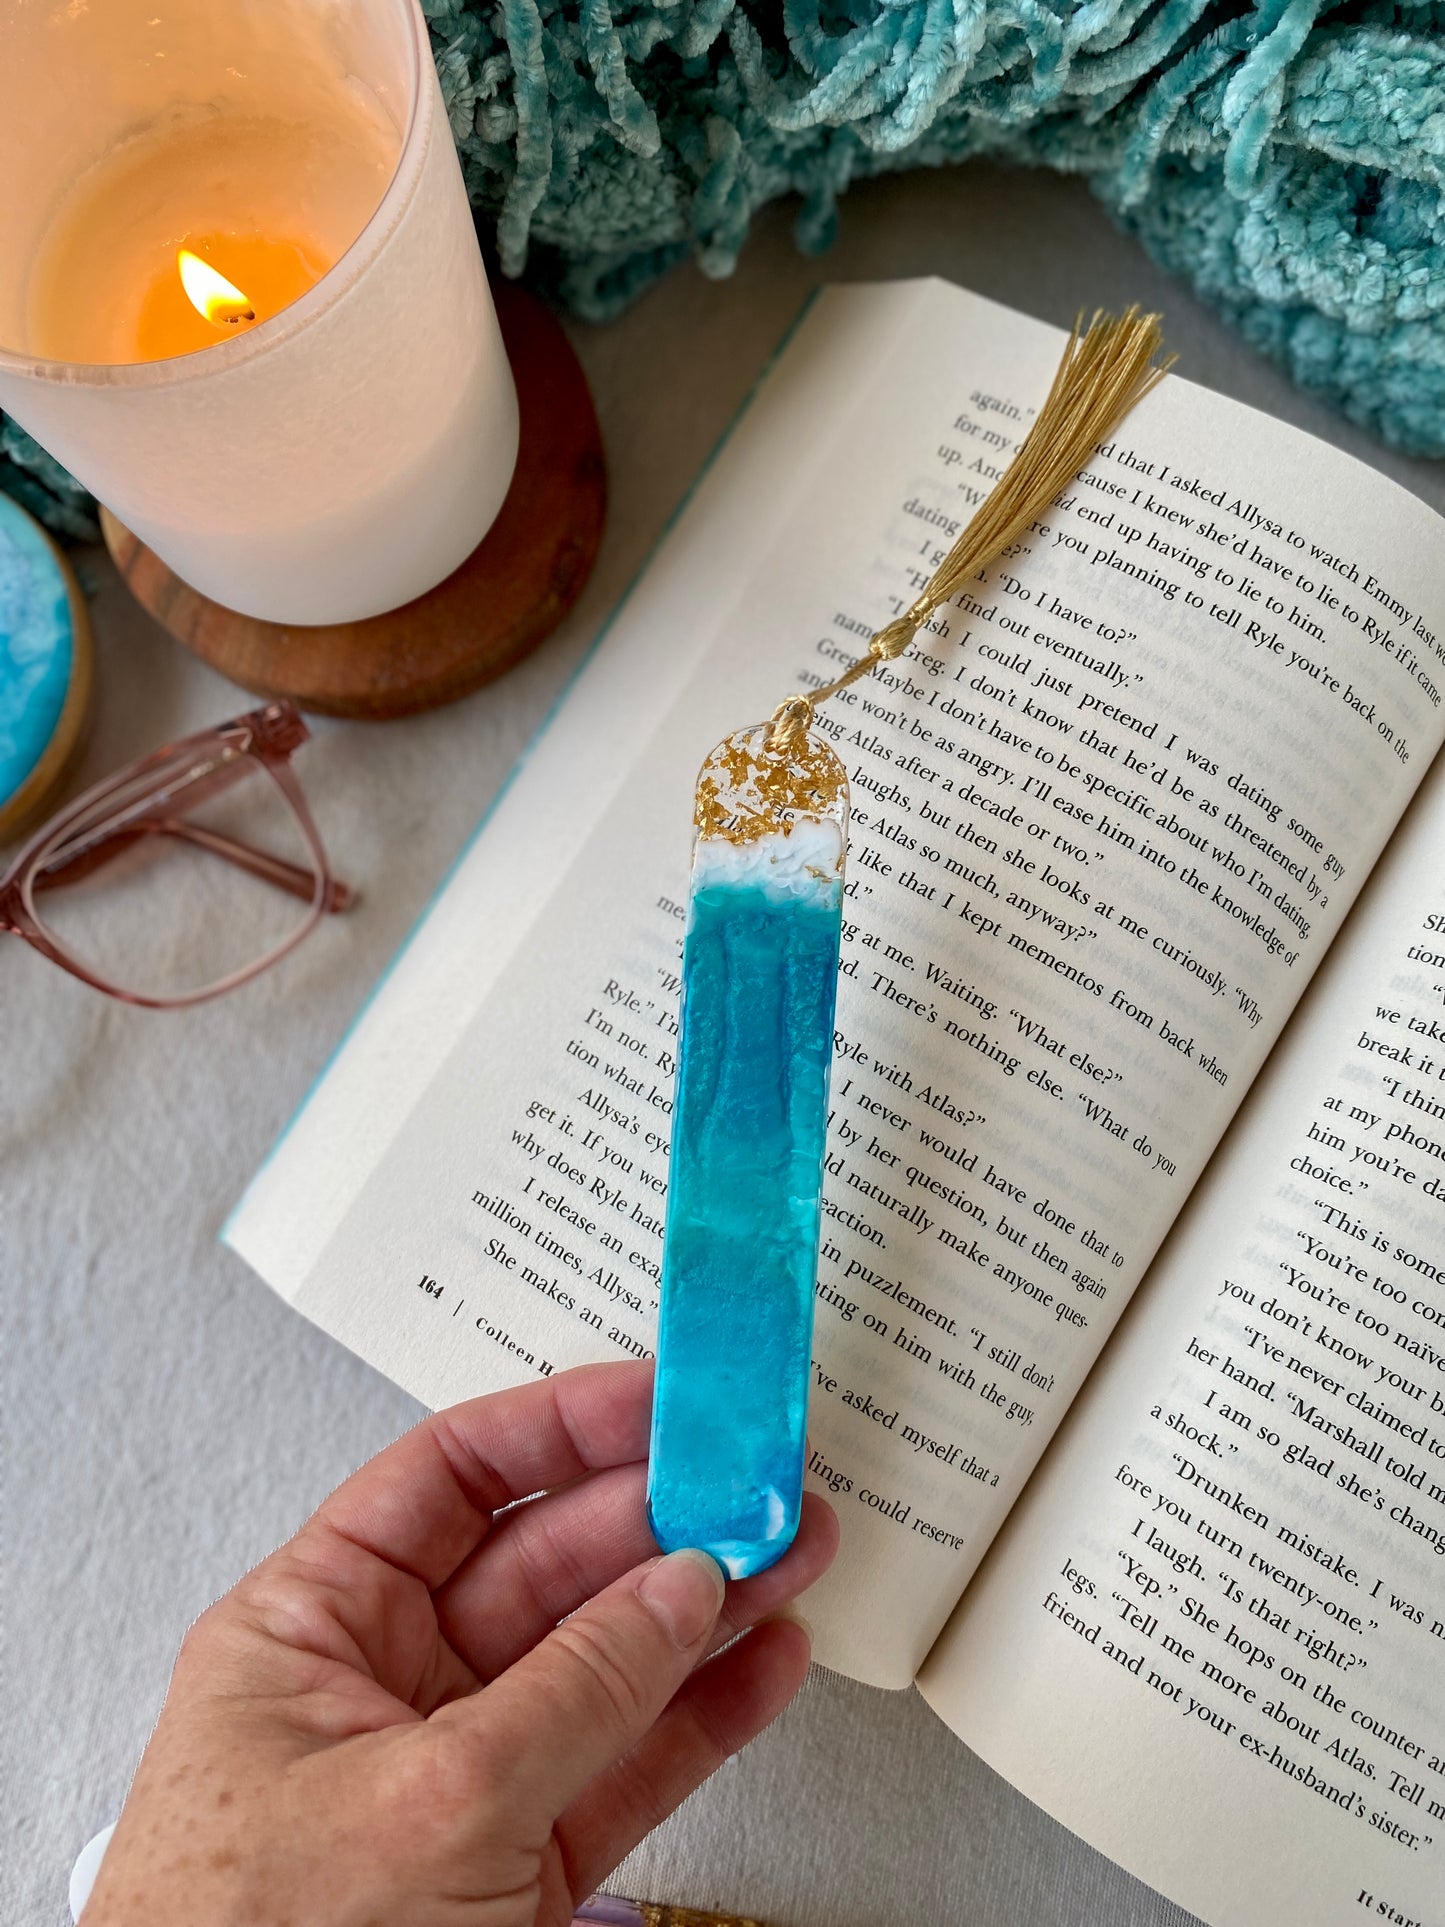 BOOKMARK - created in teal resin with gold flakes